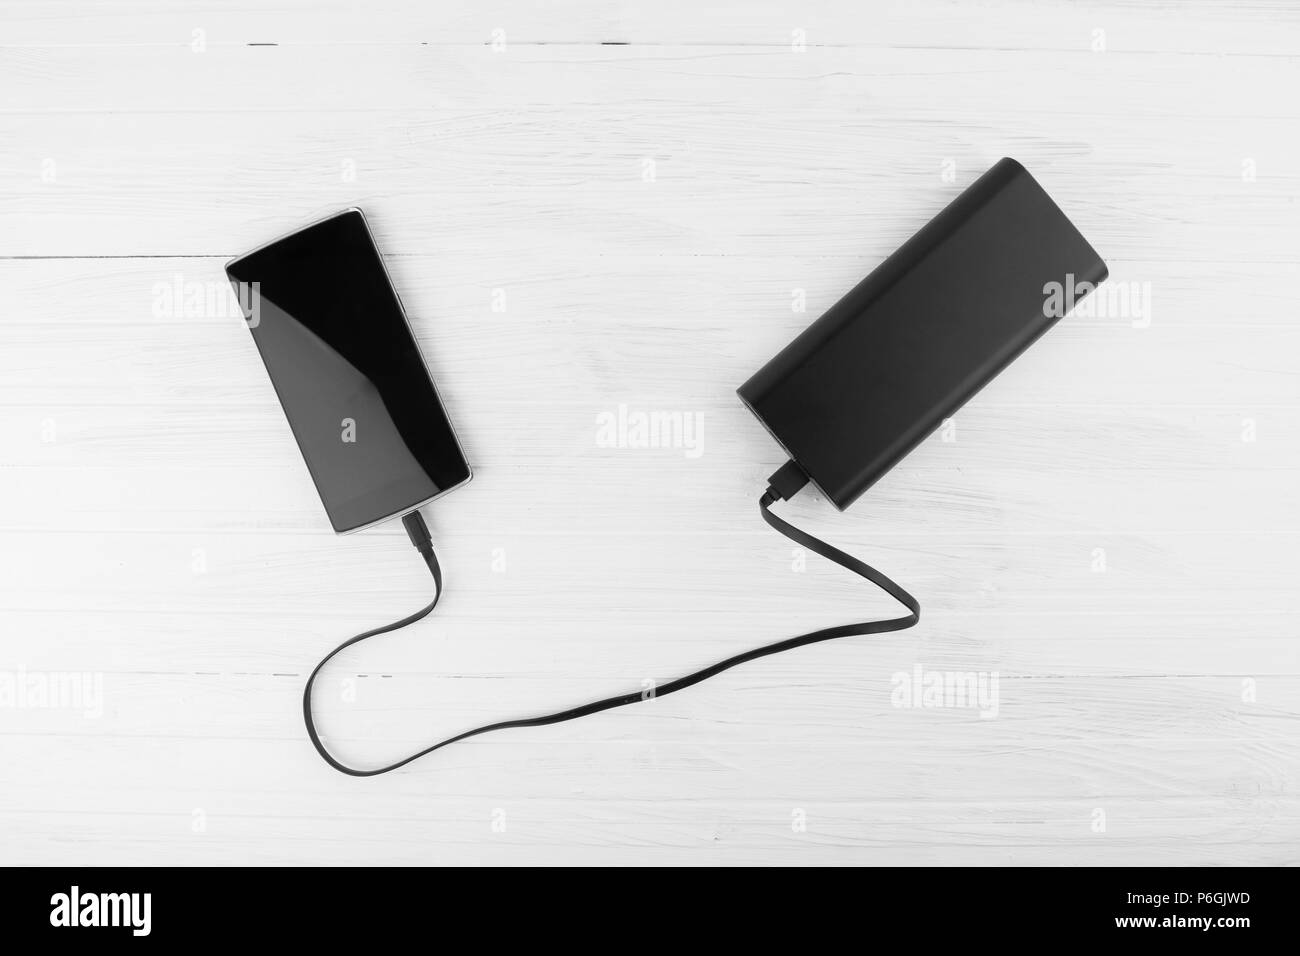 Black Smart Phone Connected To Big Battery Power Bank Charging Concept On White Painted Wooden Background Stock Photo